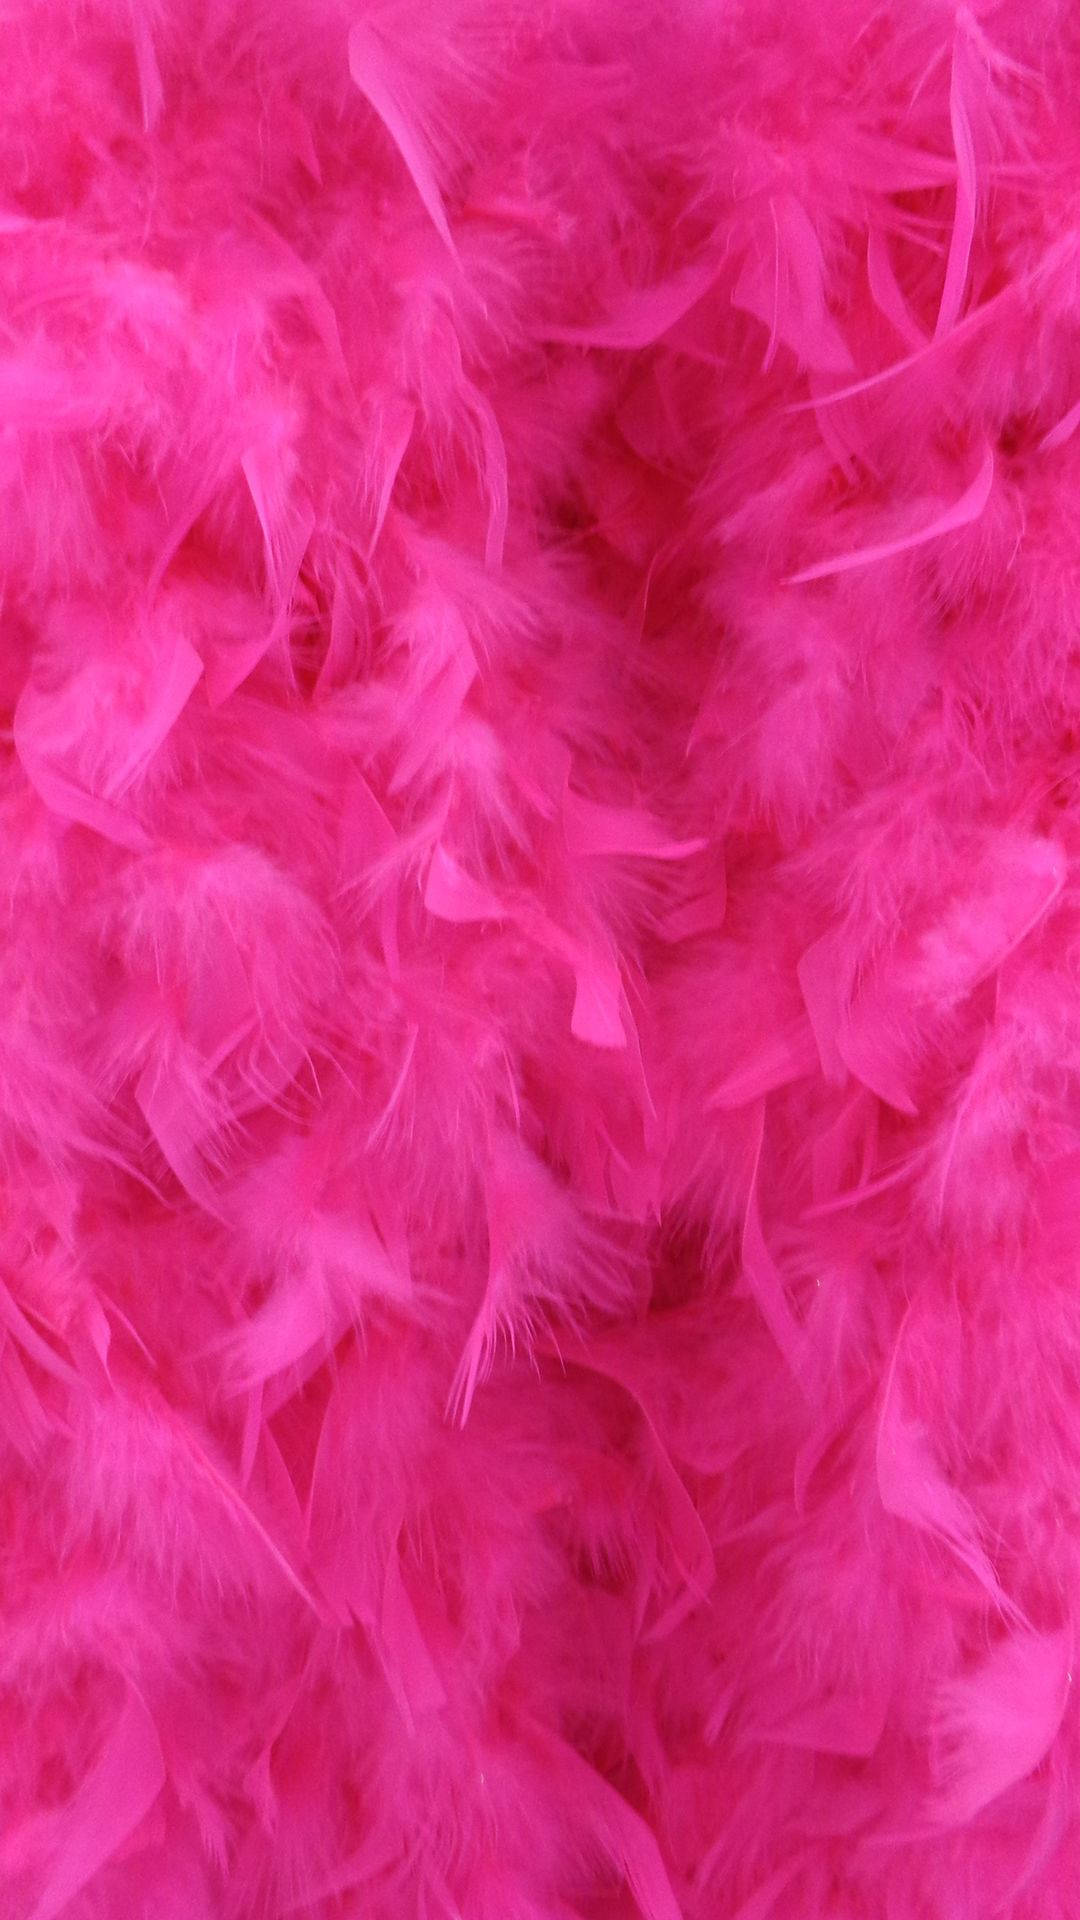 LG Phone Bright Pink Feathers Wallpaper